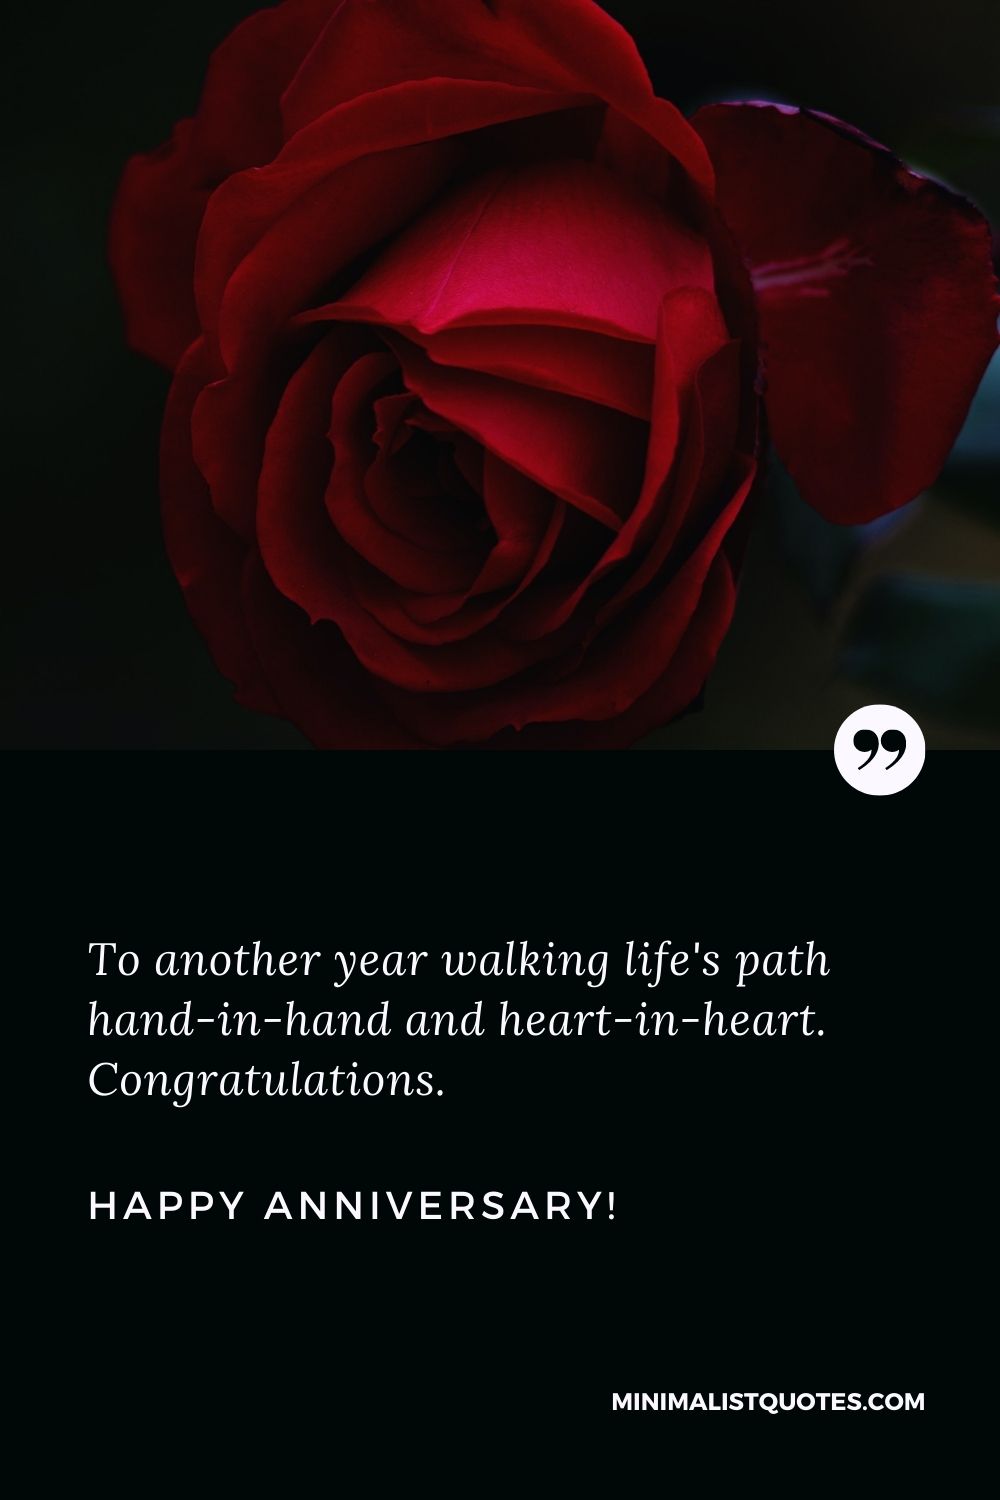 Marriage anniversary quotes: To another year walking life's path hand-in-hand and heart-in-heart. Congratulations. Happy Anniversary!